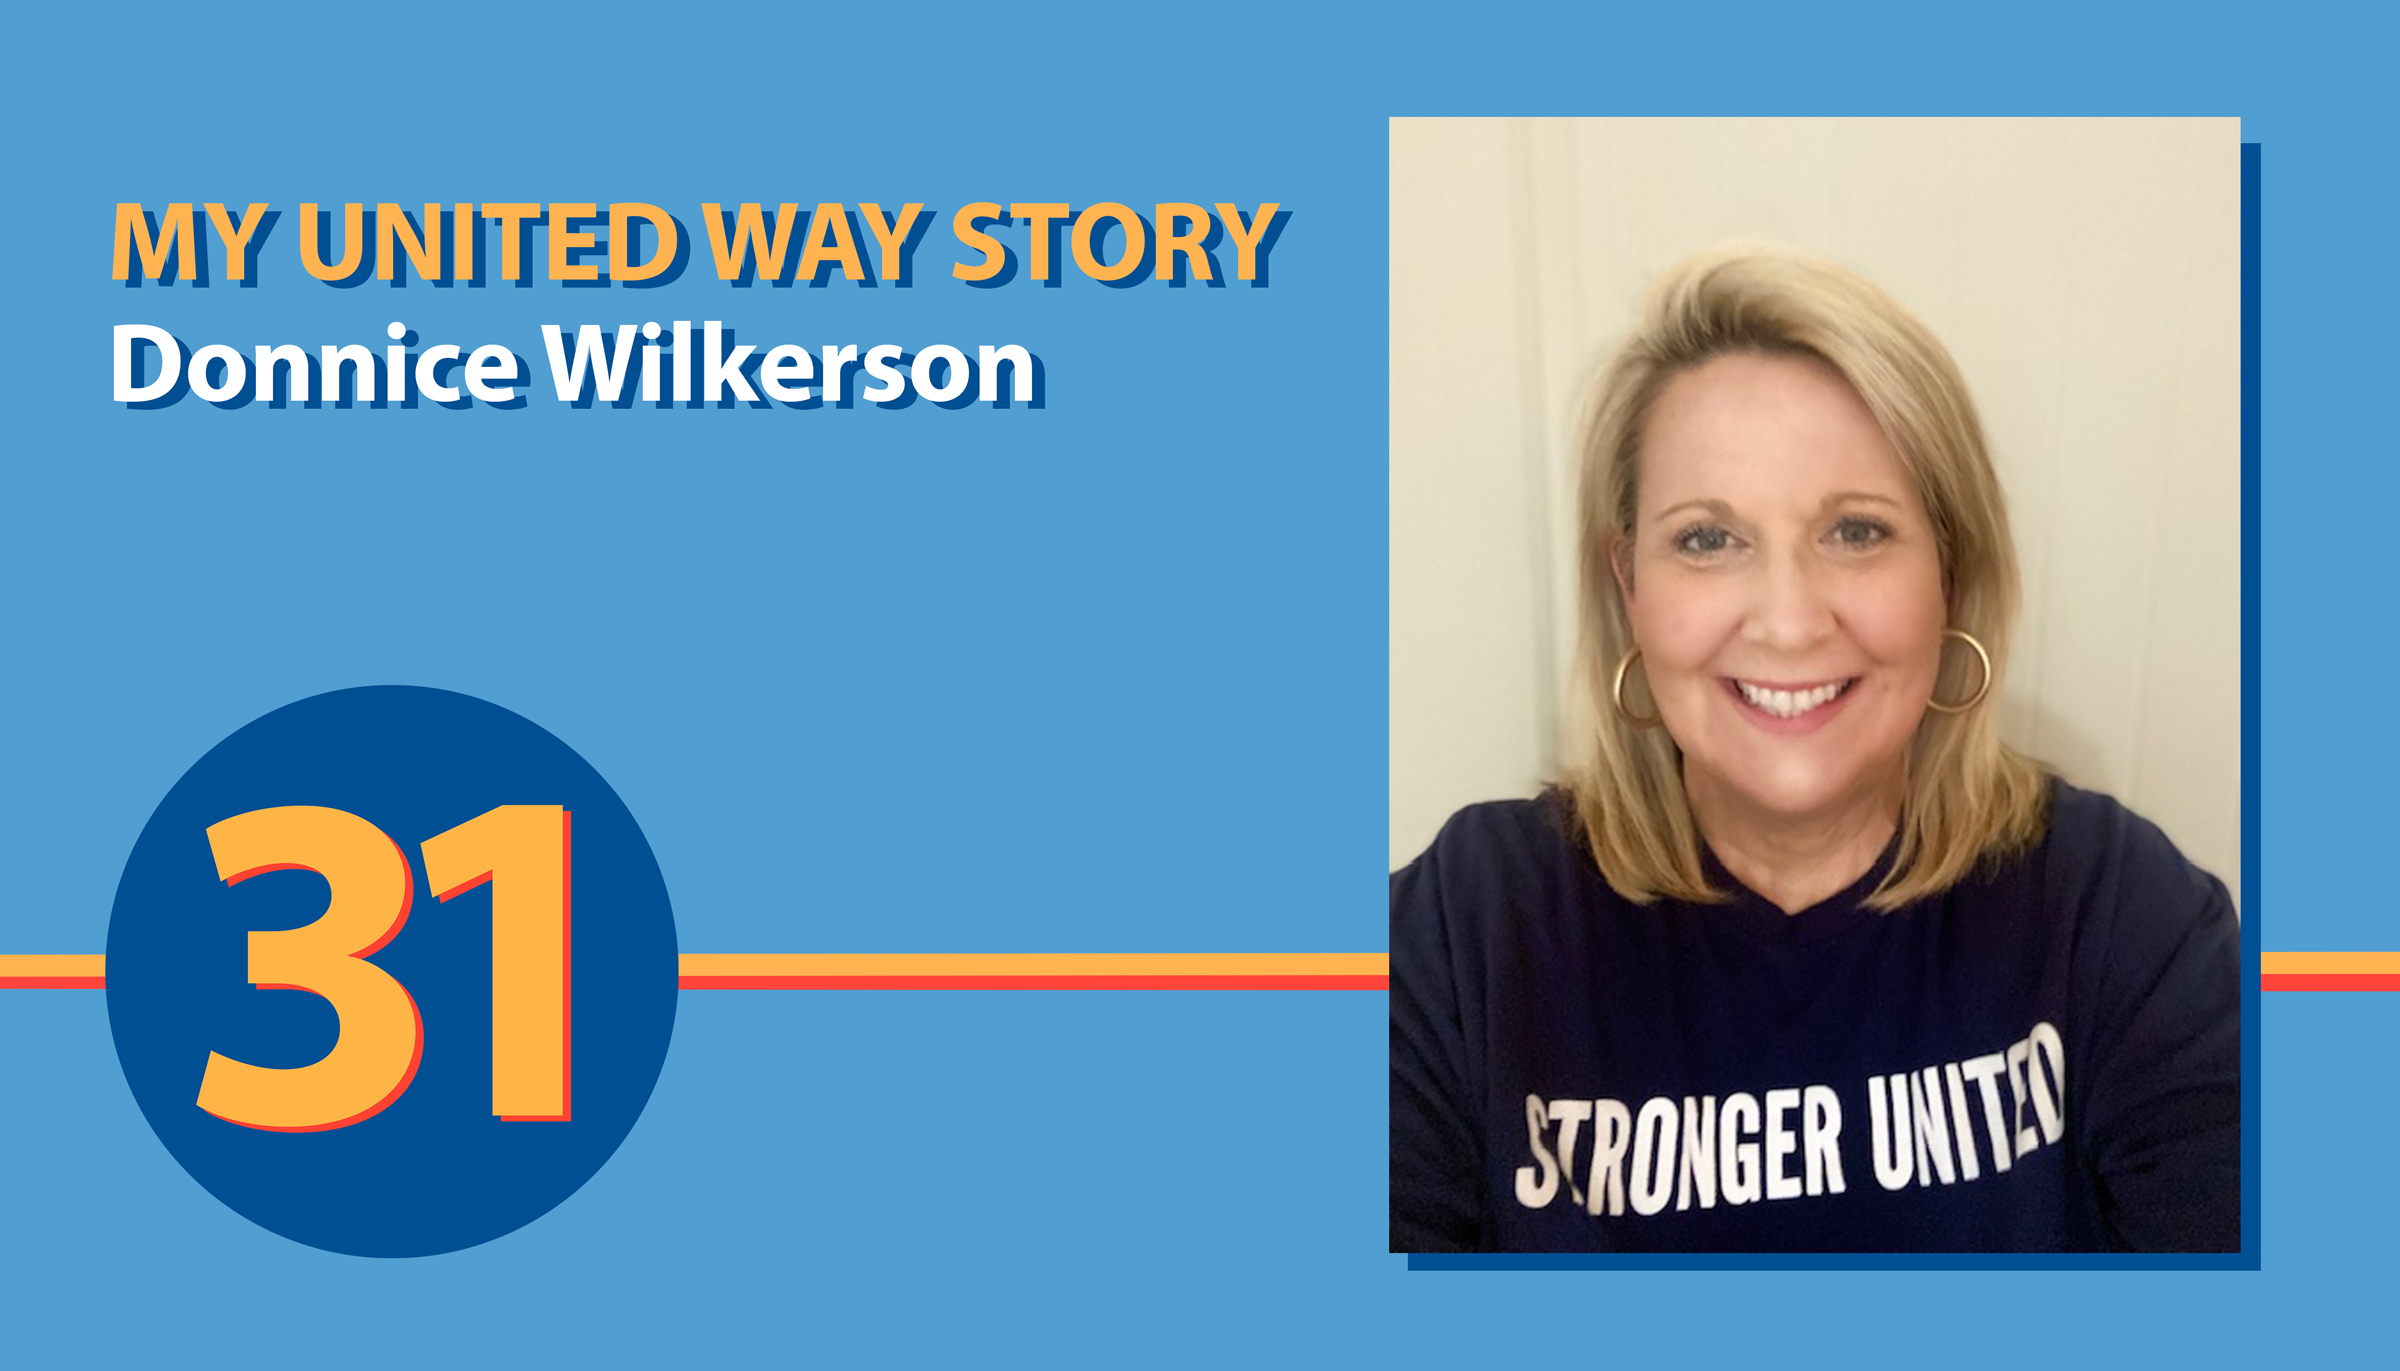 My United Way Story: Donnice Wilkerson